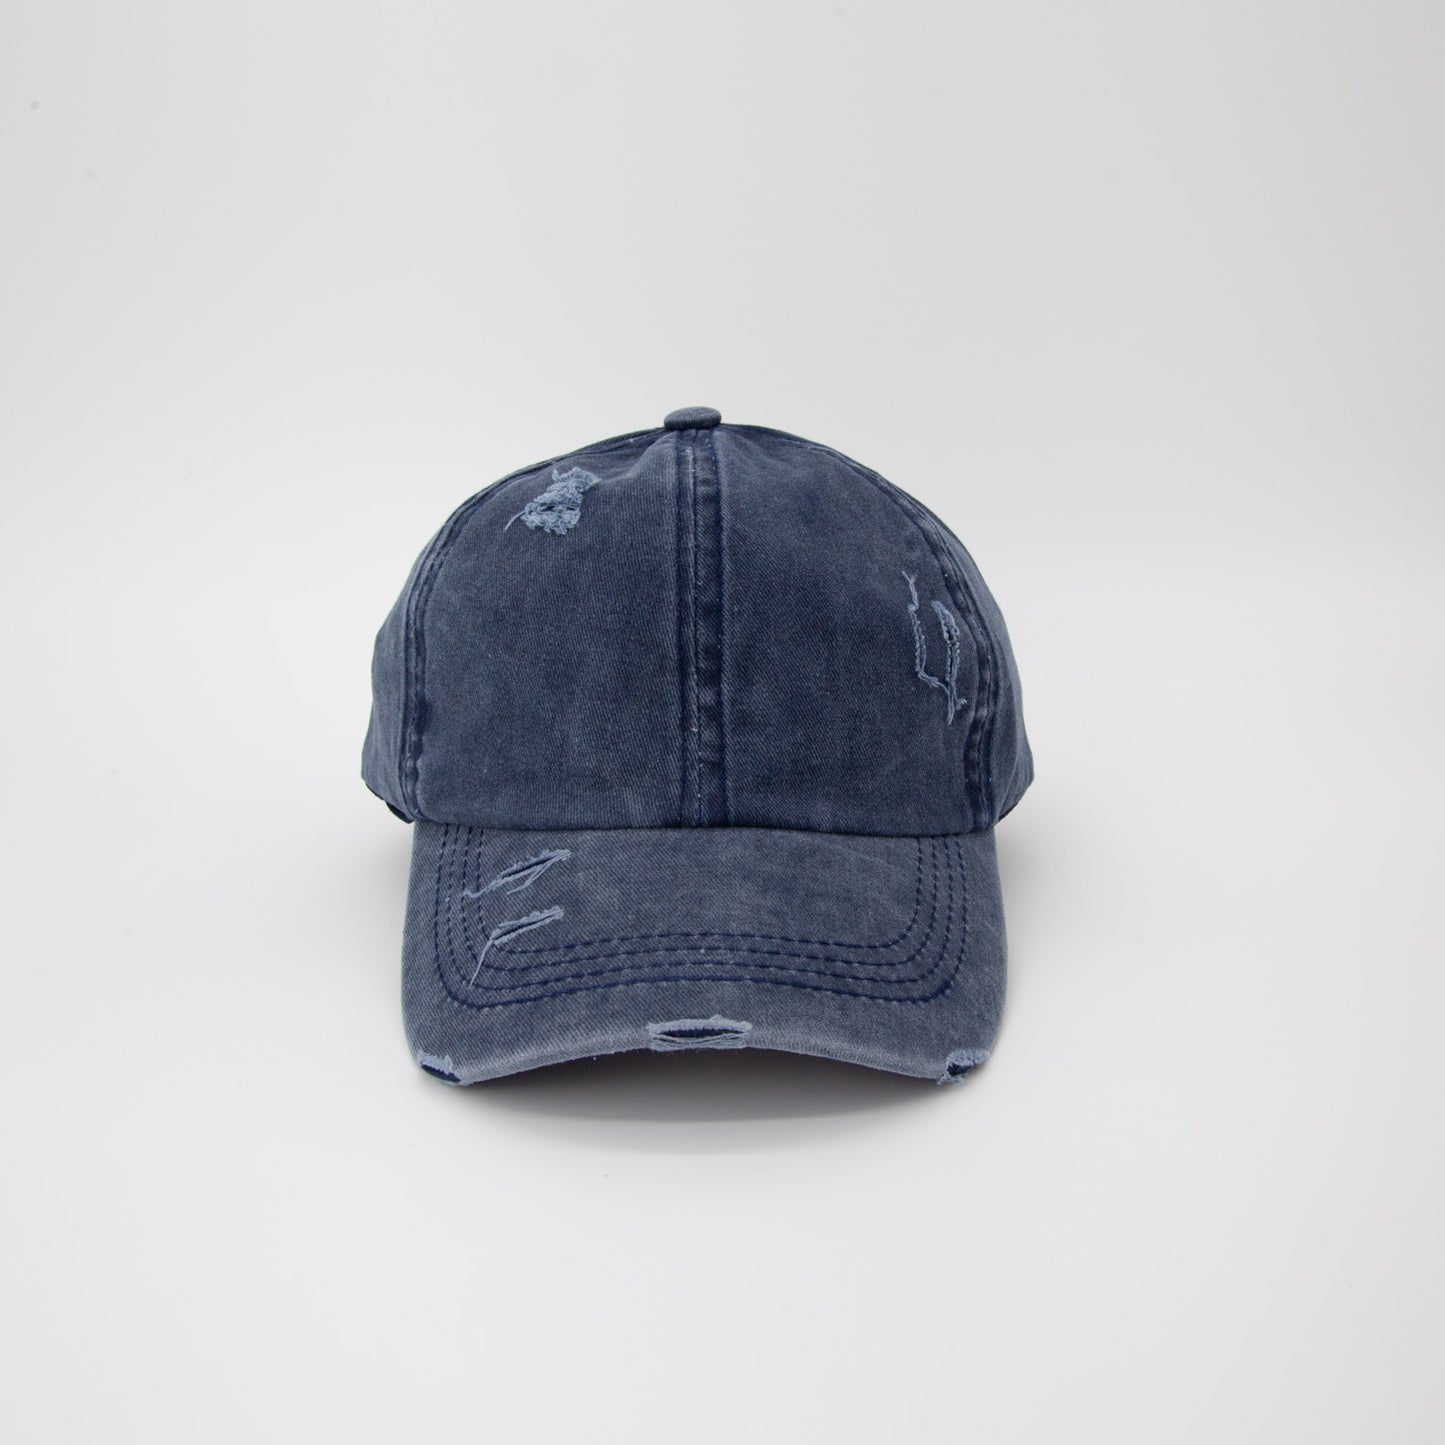 Riley Distressed Washed Baseball Cap in Blue